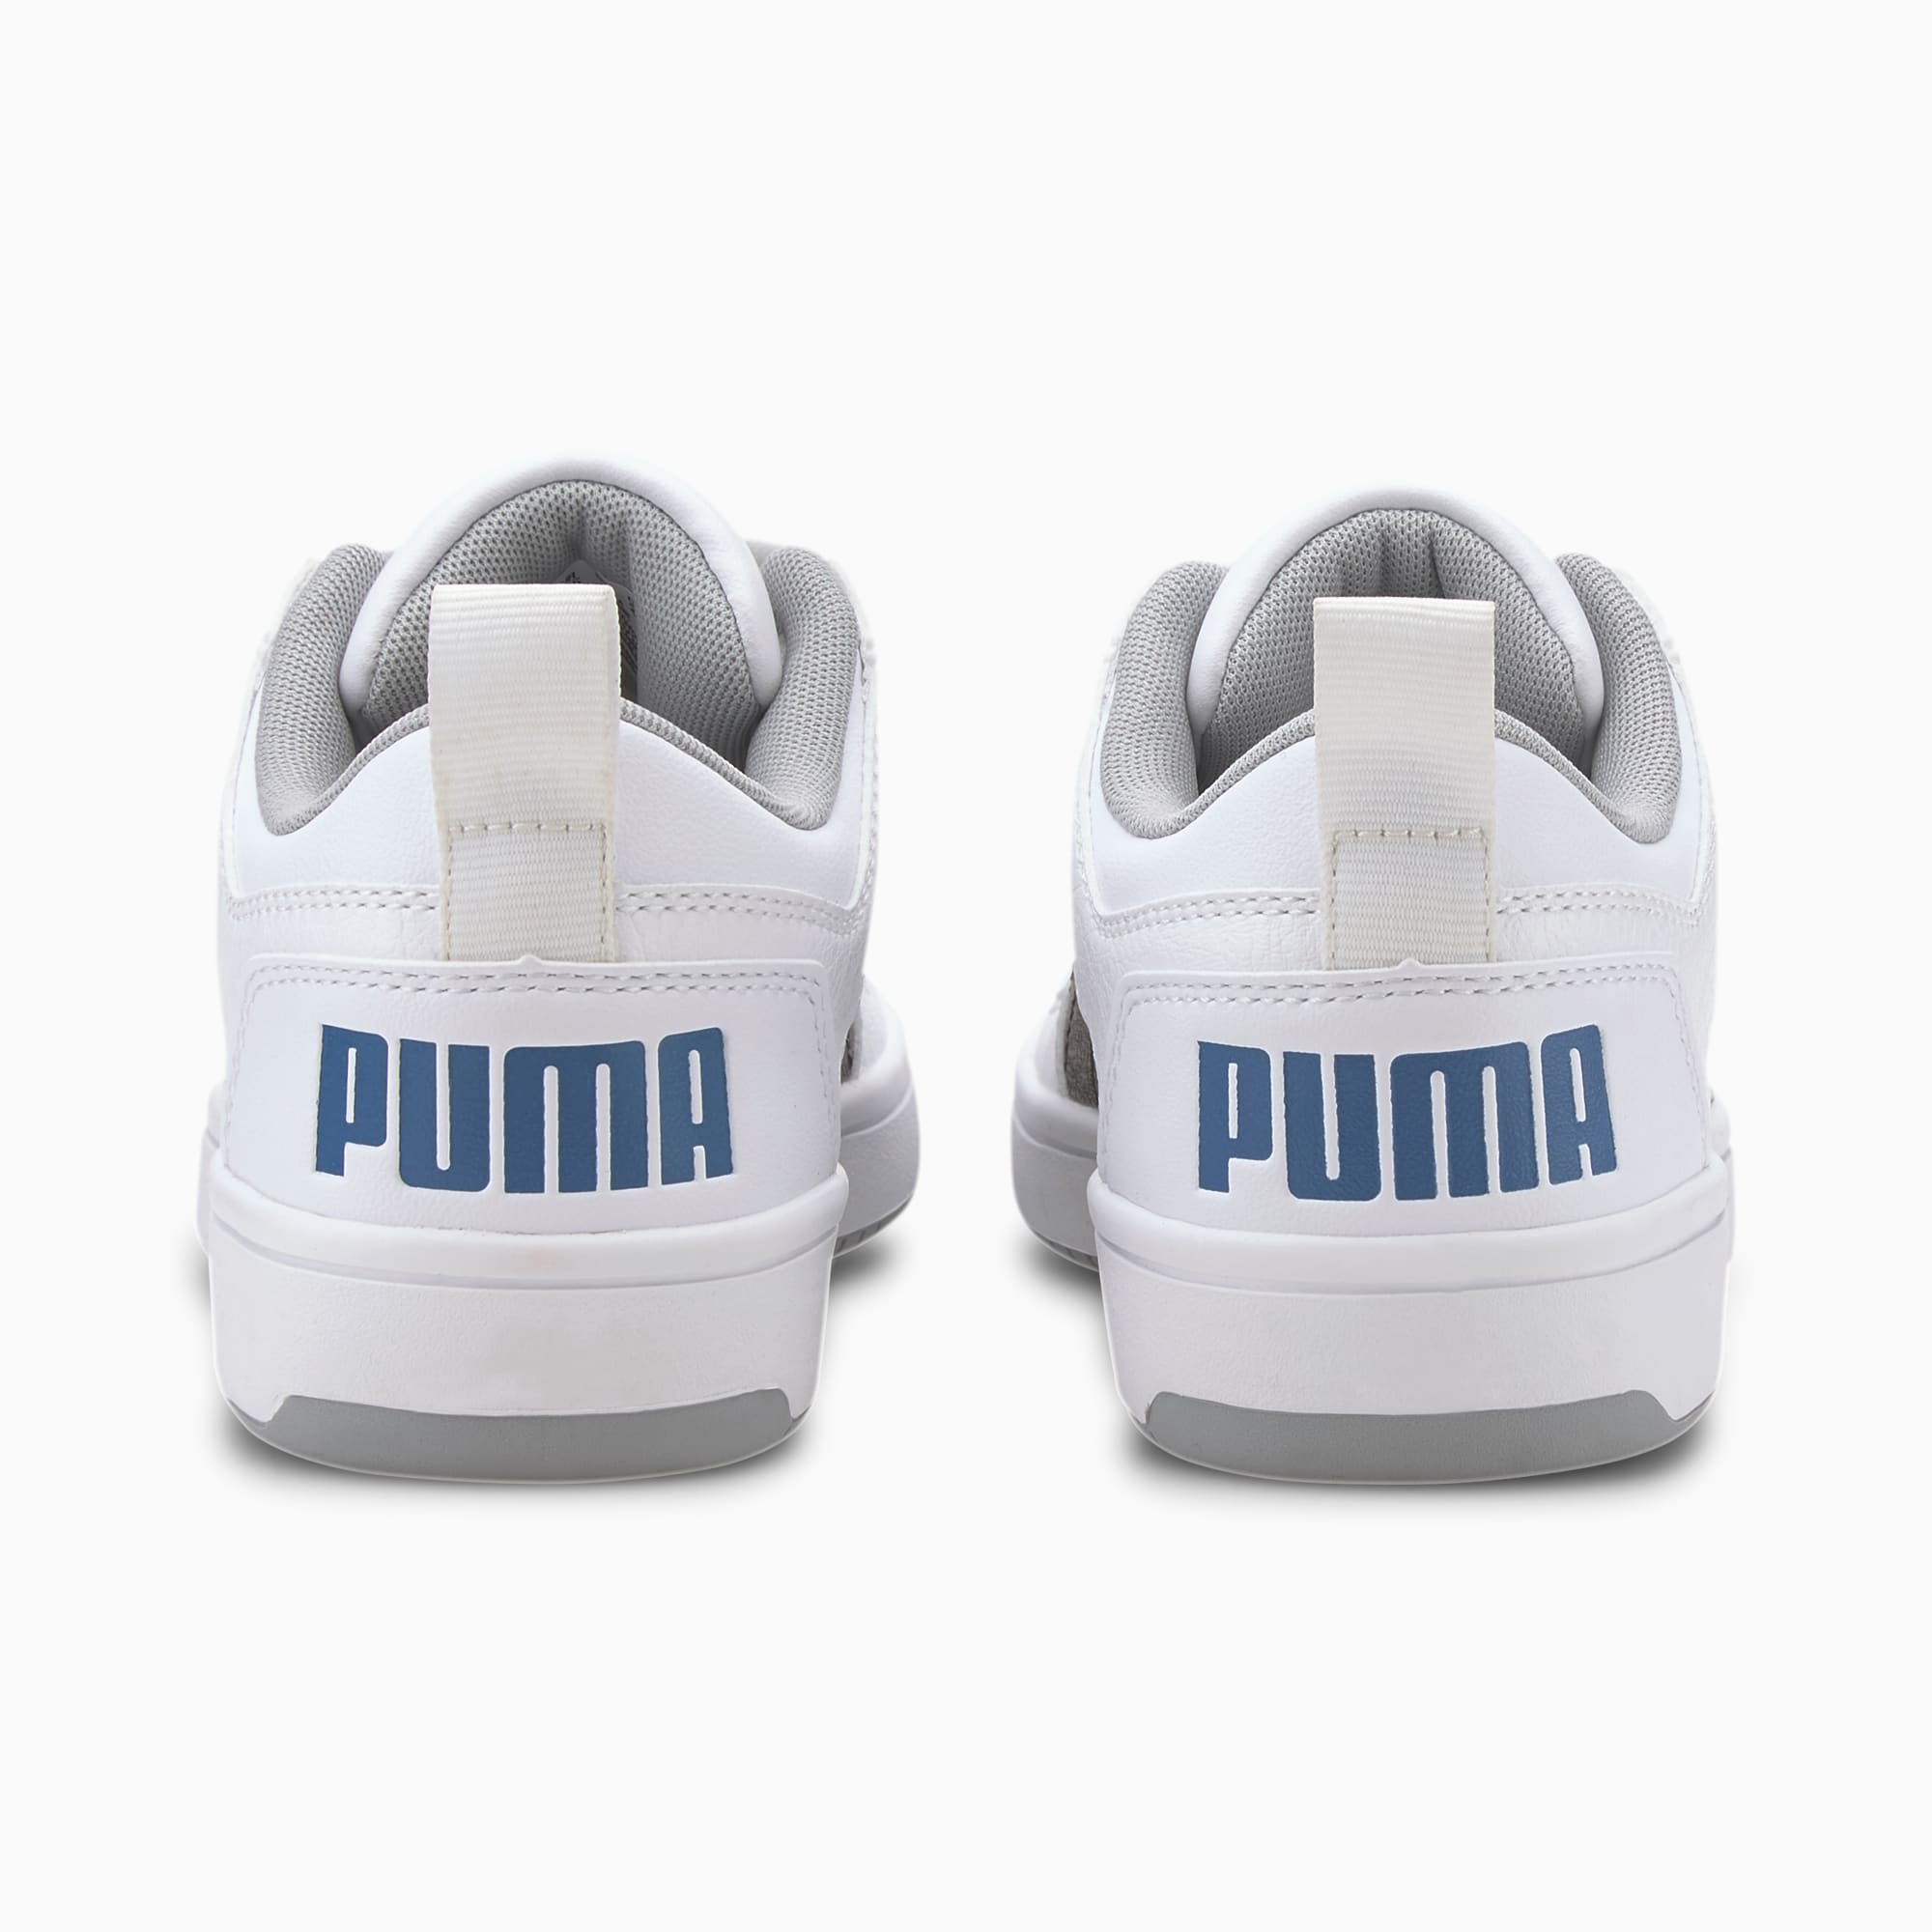 can puma shoes be washed